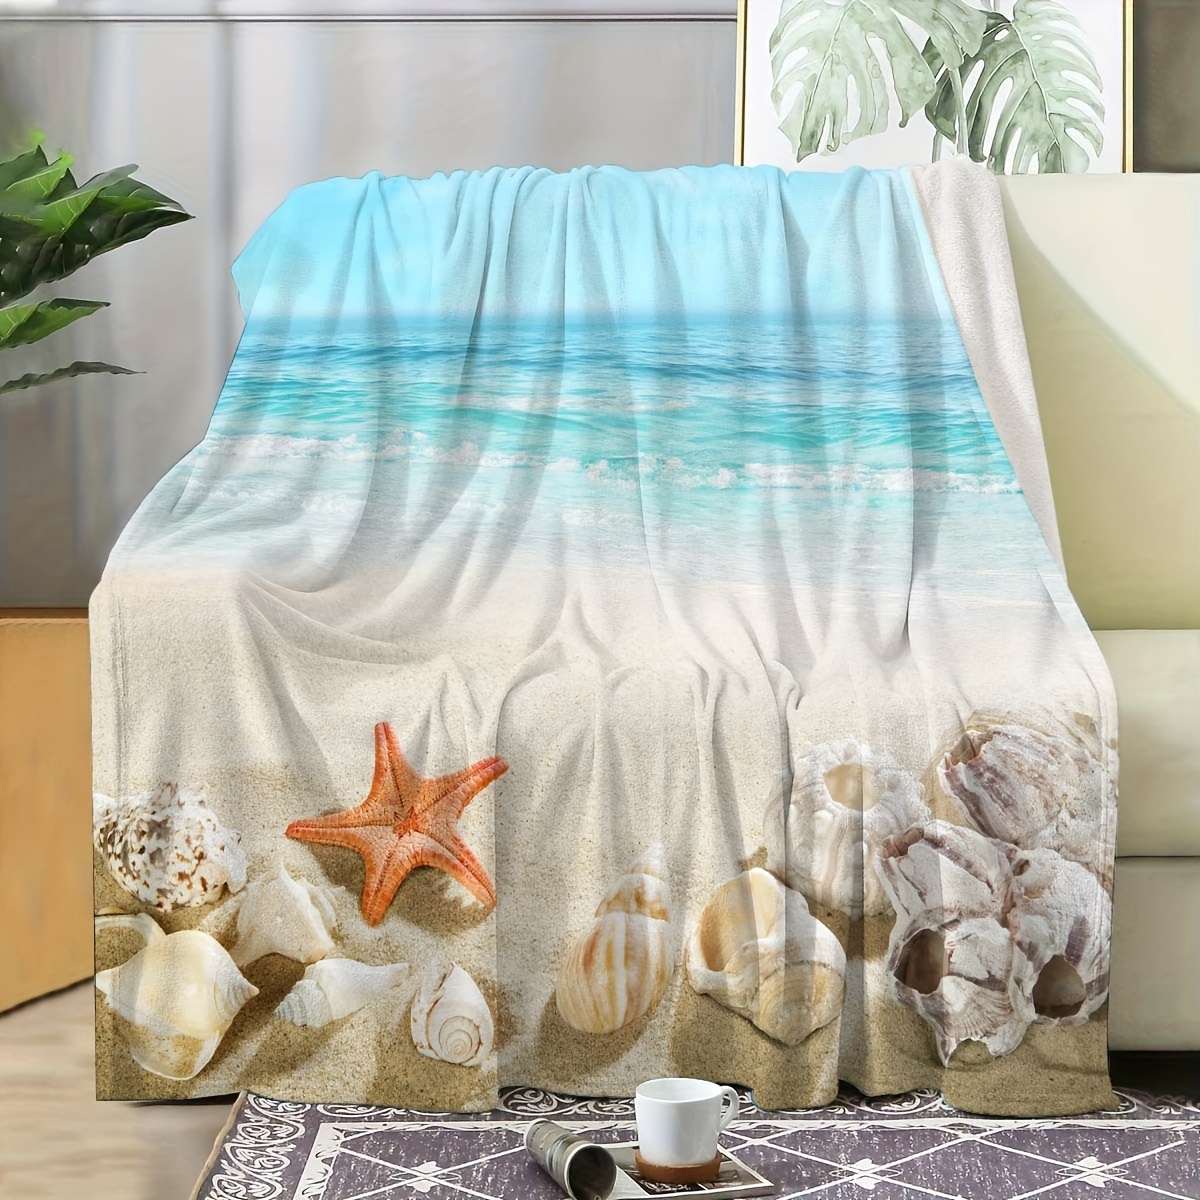 

Soft & Cozy Ocean-inspired Flannel Throw Blanket - Versatile For Travel, Couch, Bed, Office Decor - Allergy-friendly, Machine Washable - Perfect Gift For Boys, Girls, Adults - All Seasons